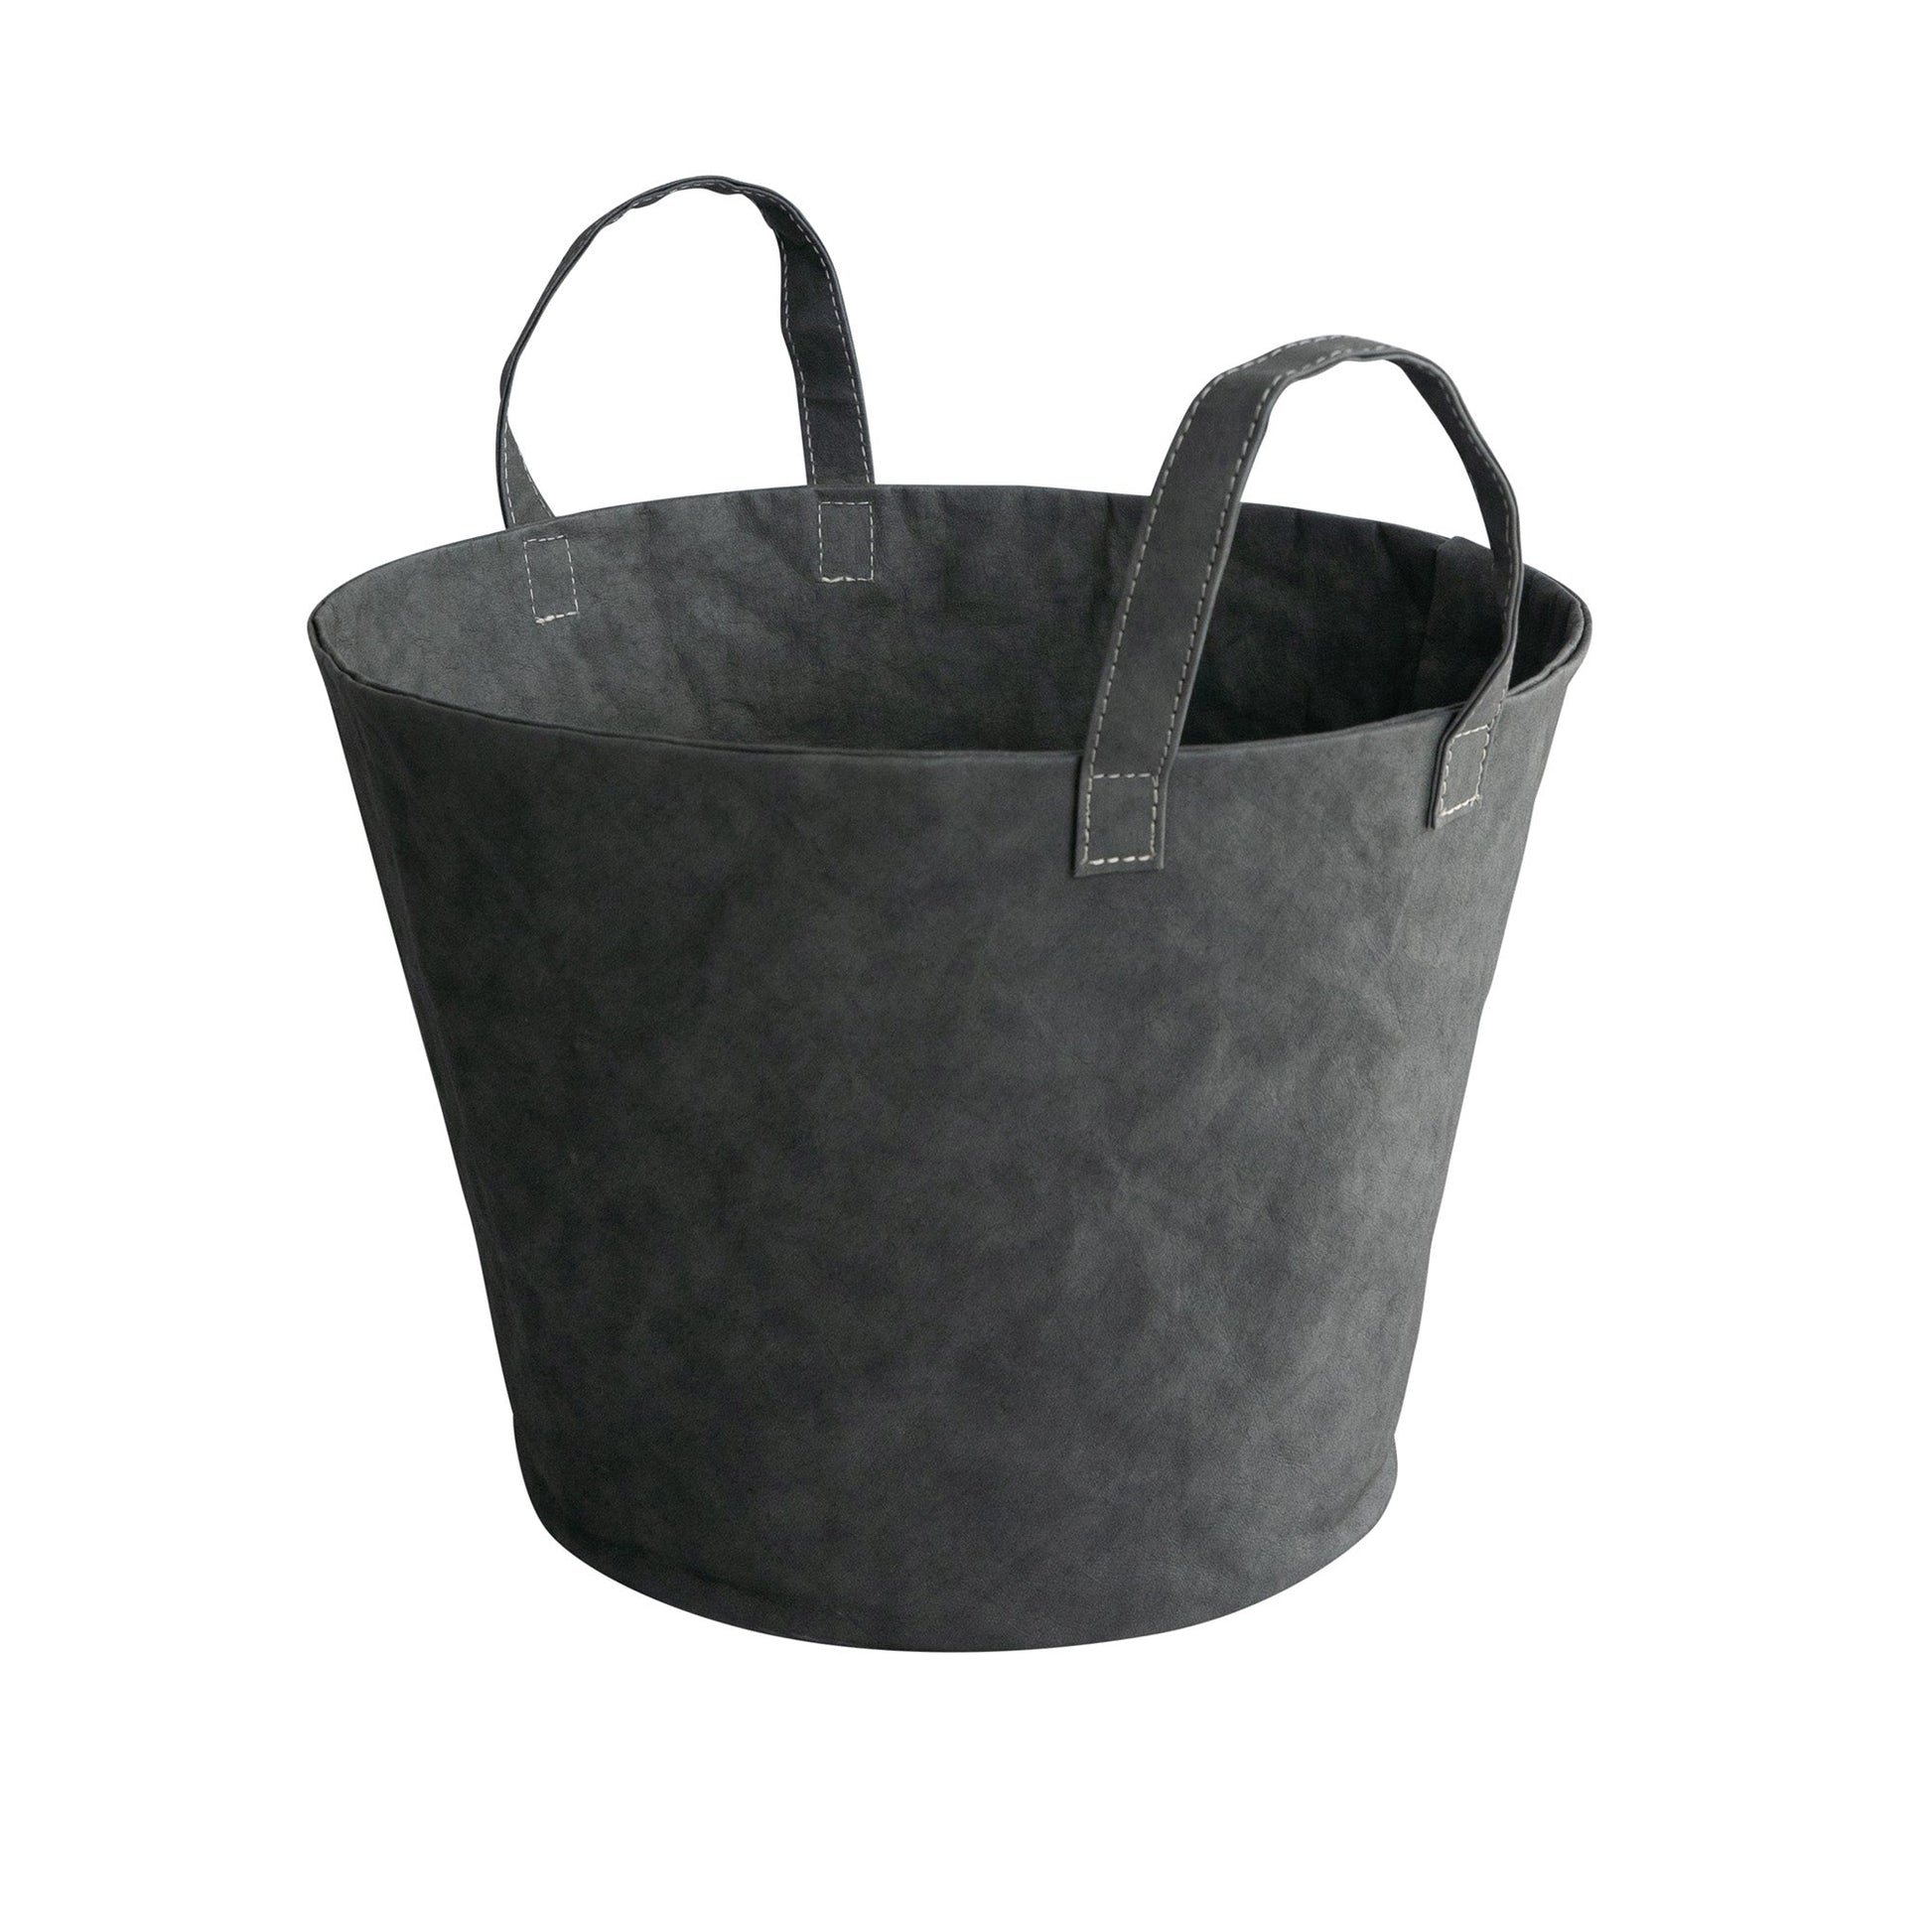 A washable paper basket is shown from a 3/4 angle. It has white stitching, two top handles and is shown in a dark grey colour.